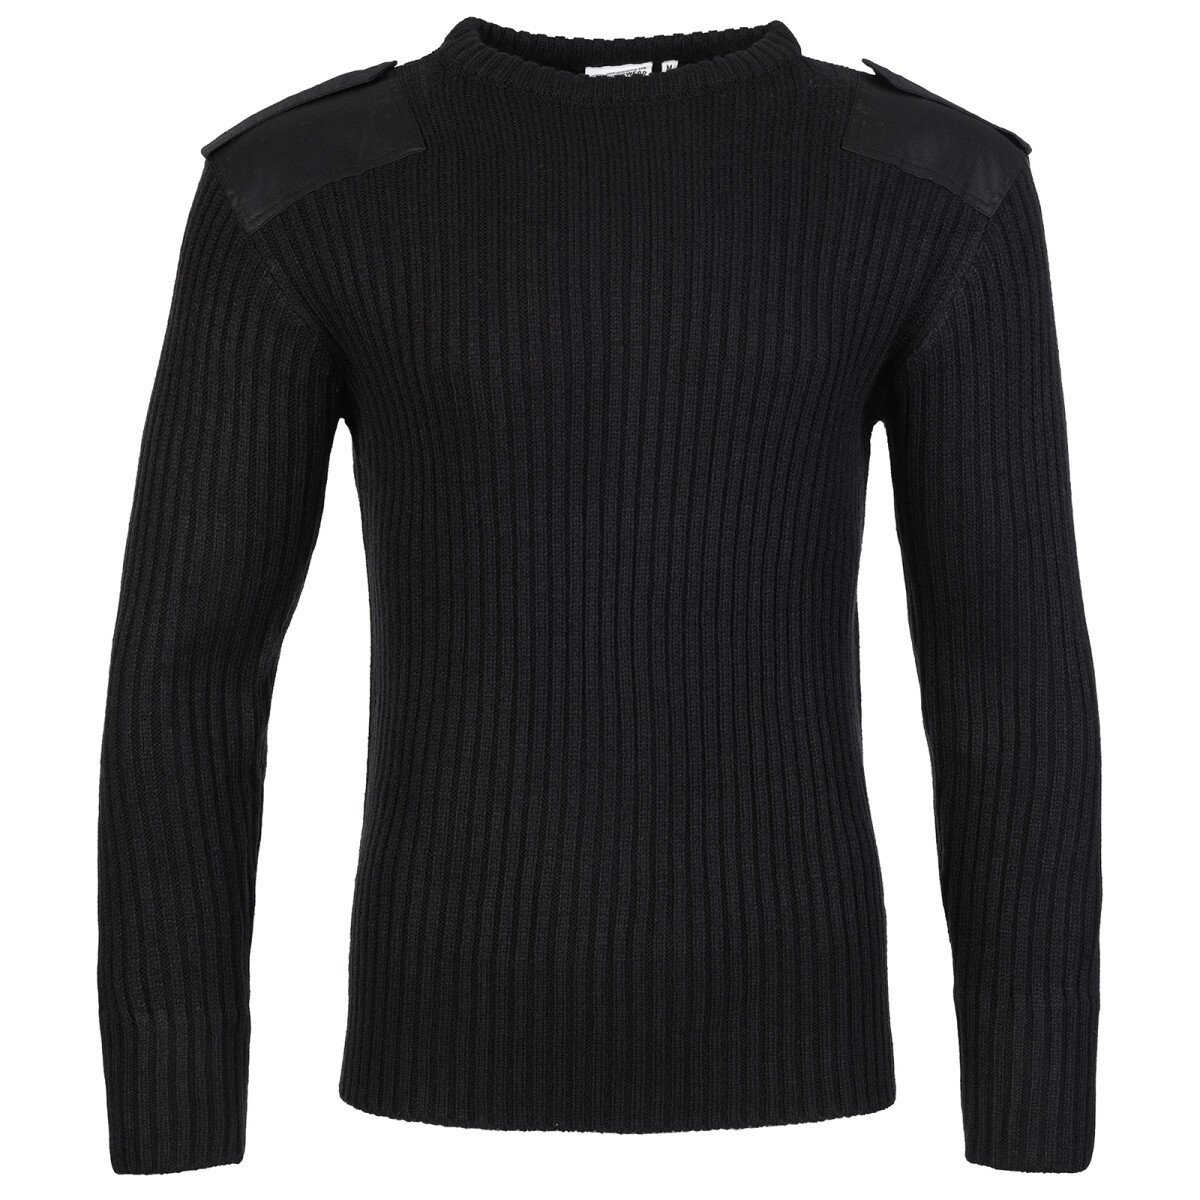 Fort 120 Crew Neck Combat Jumper from Lawson HIS